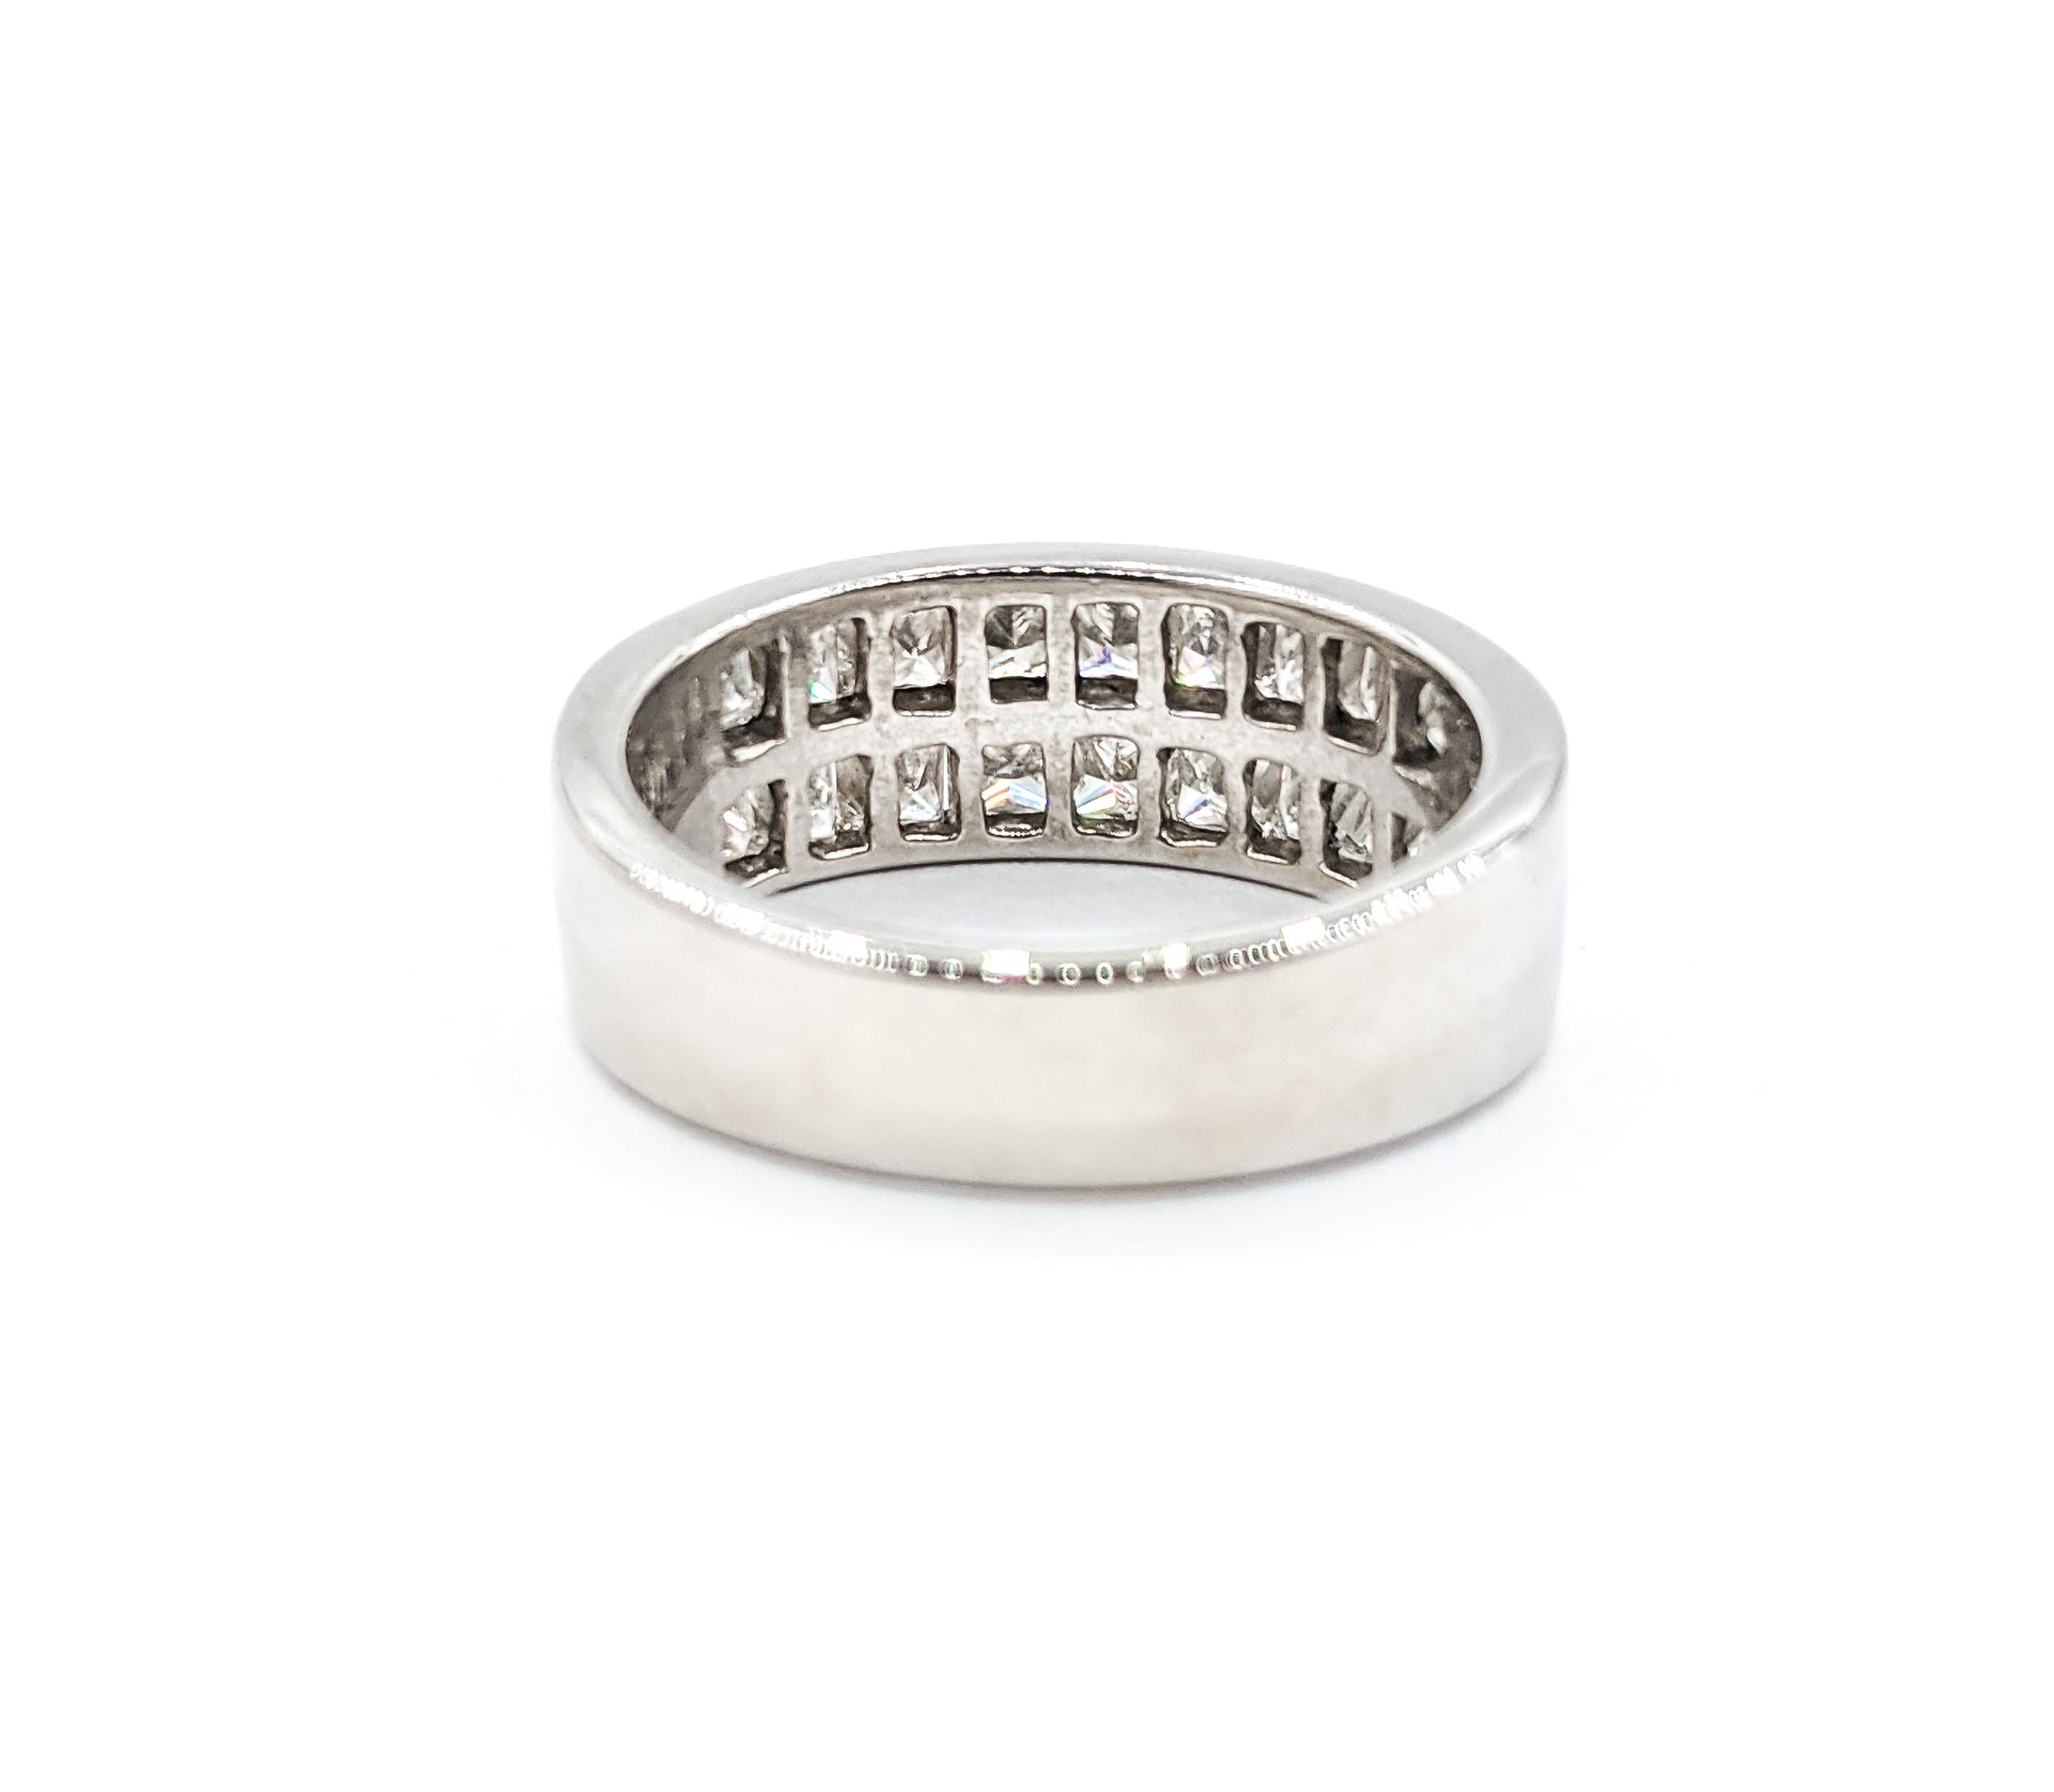 1.80ctw Diamond Two-Row Ring In White Gold

This Beautiful ring rafted in elegant 14kt White Gold, this exquisite ring is adorned with 1.80ctw princess-cut diamonds, boasting SI clarity and a near-colorless white appearance. This radiant piece,